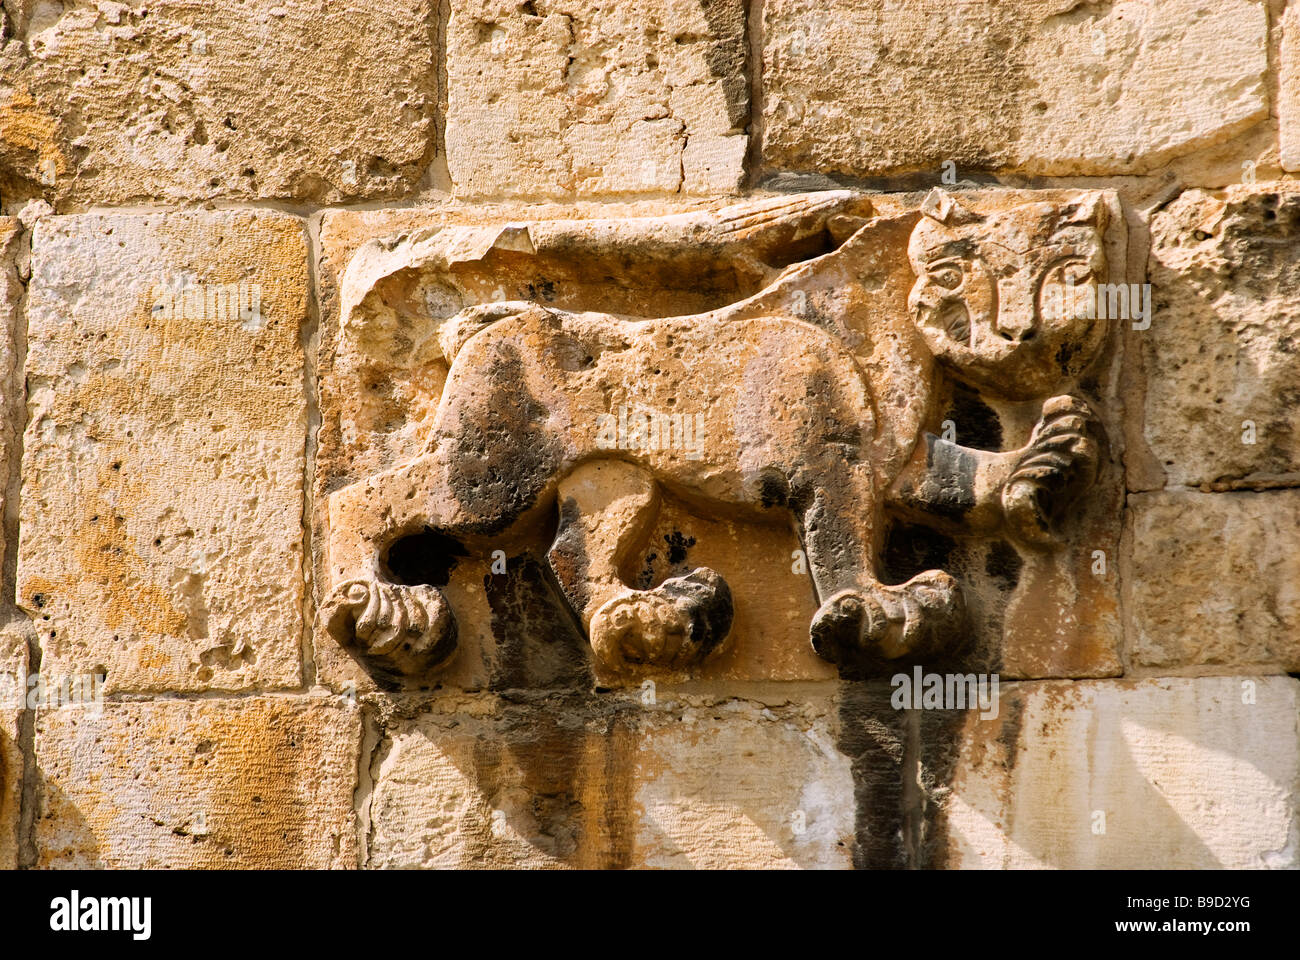 Bas relief carvings depicting a lion on the 16th century Lion's or St Stephen's Gate also Bab al-Asbat in the eastern wall of the Old City Jerusalem Stock Photo